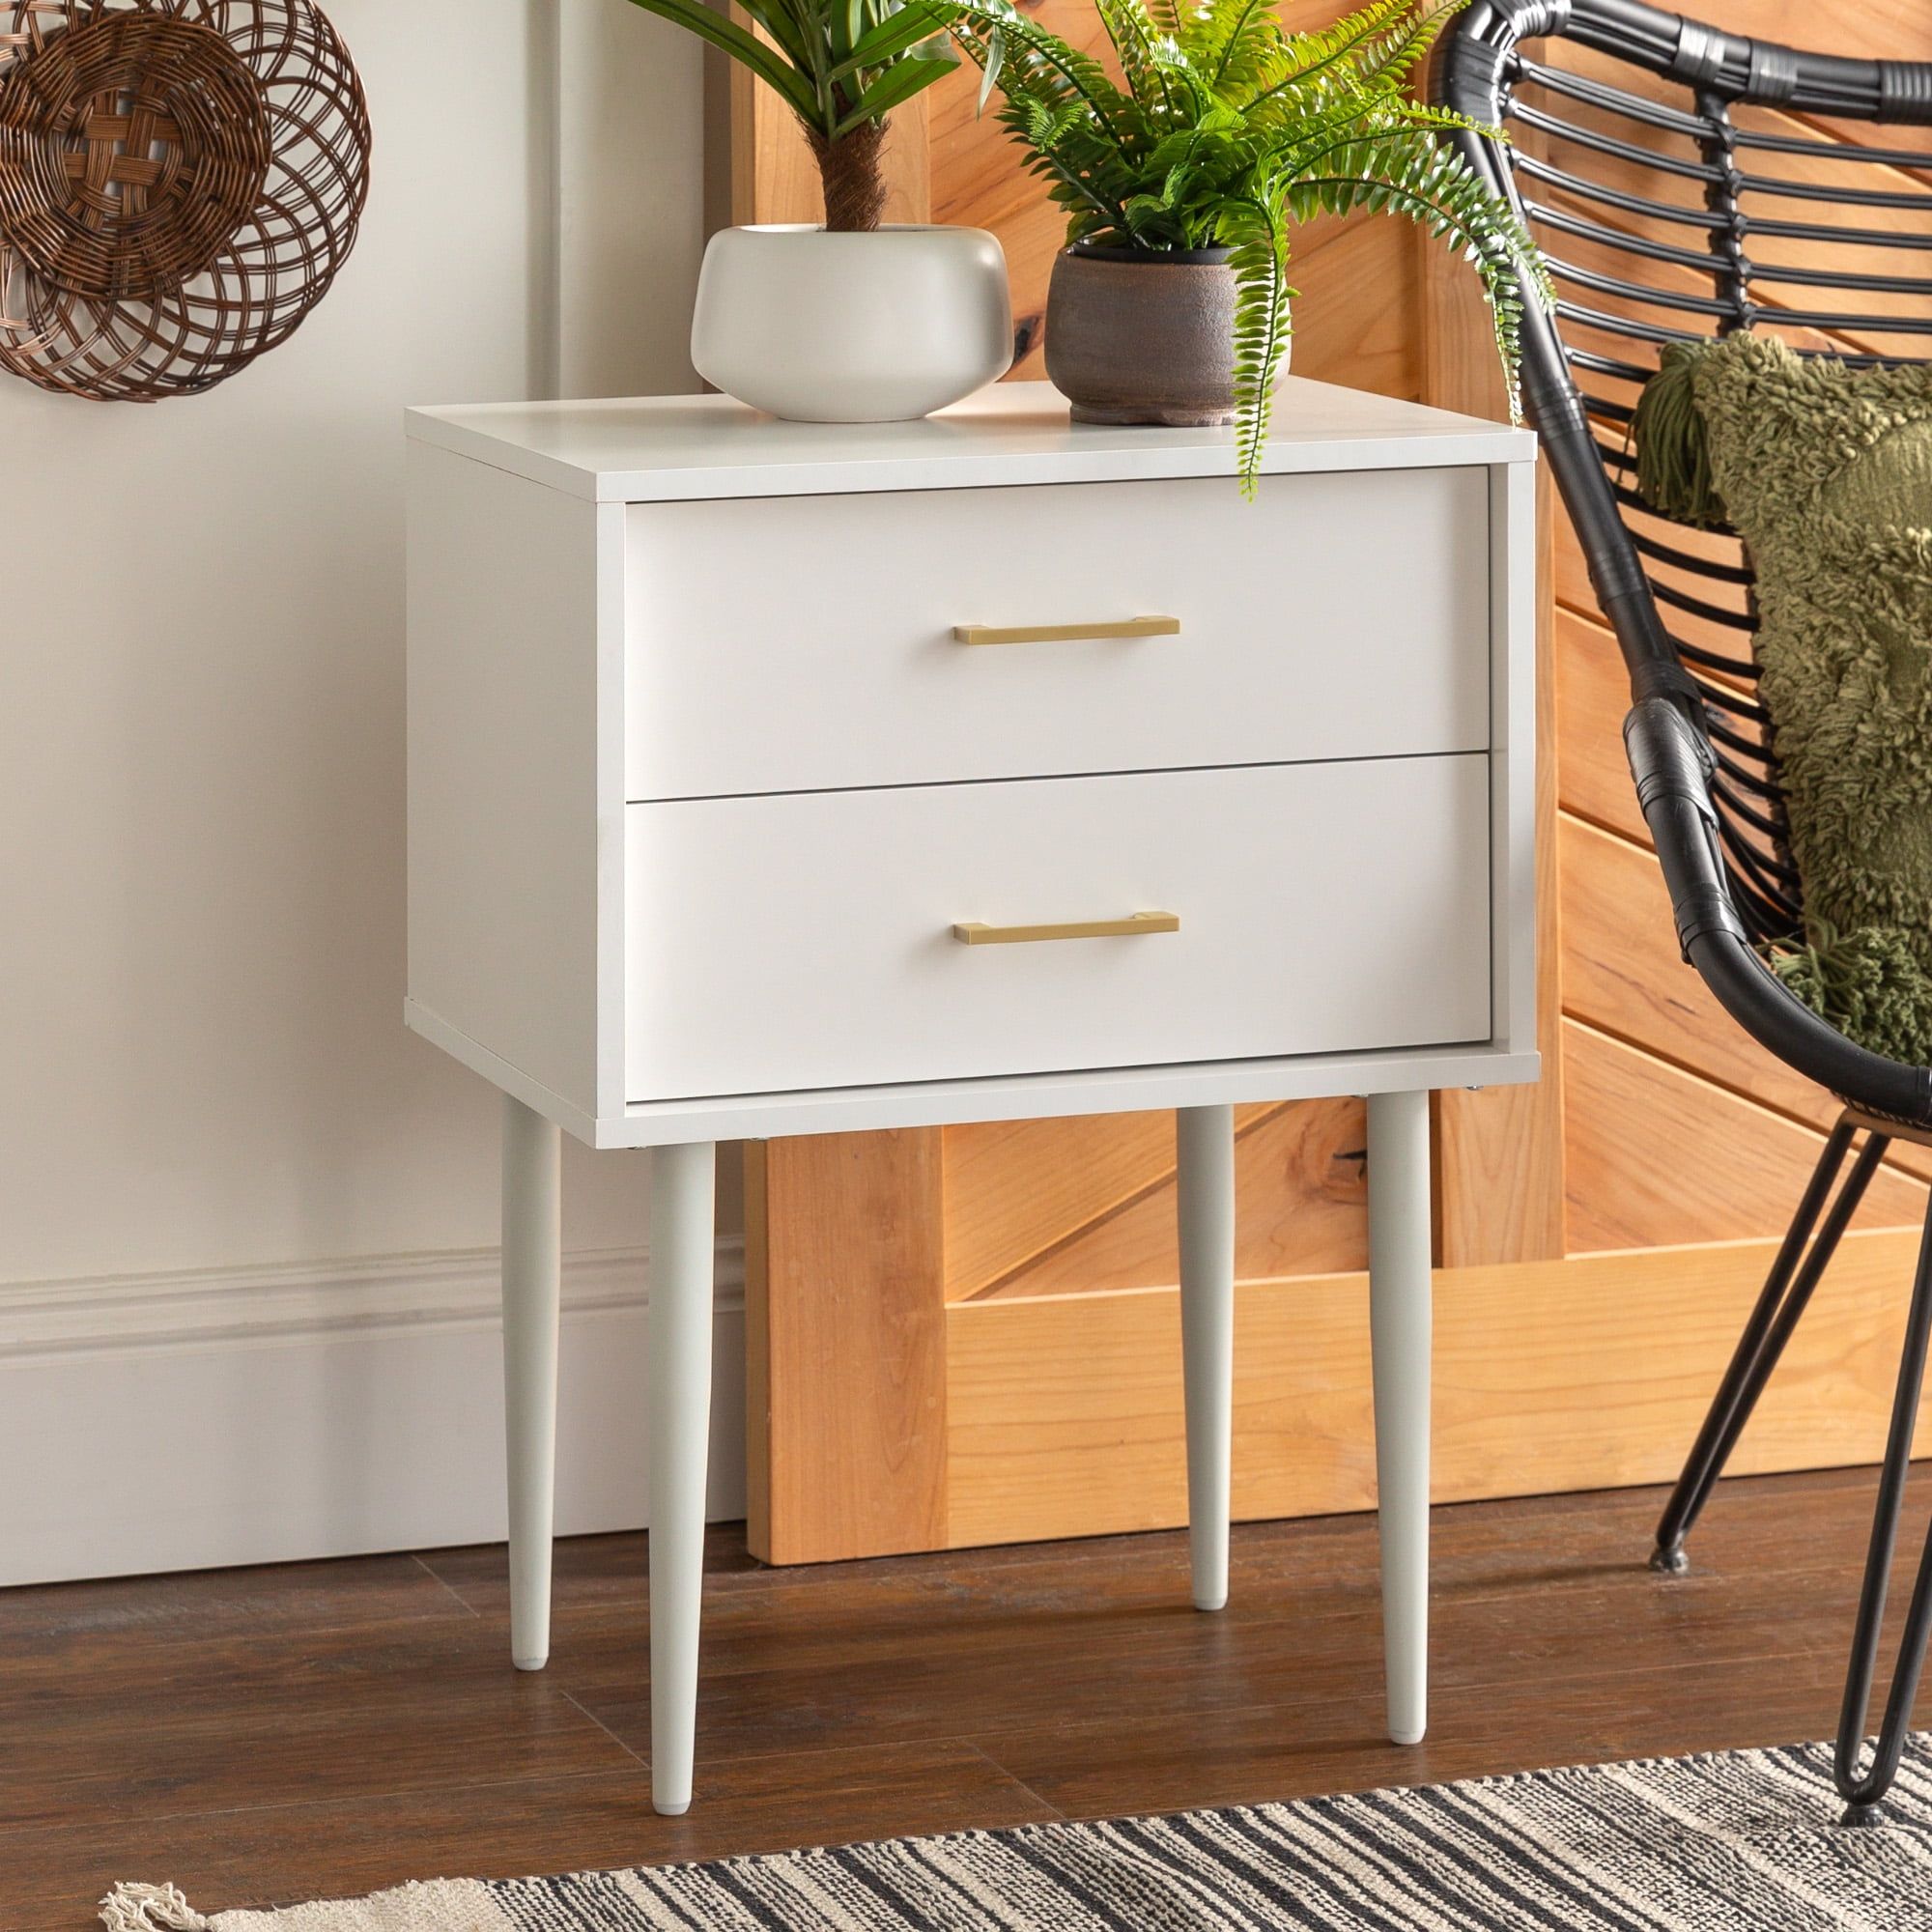 Manor Park Mid Century Modern Two Drawer End Table, White – Walmart Inside Freestanding Tables With Drawers (Gallery 10 of 20)